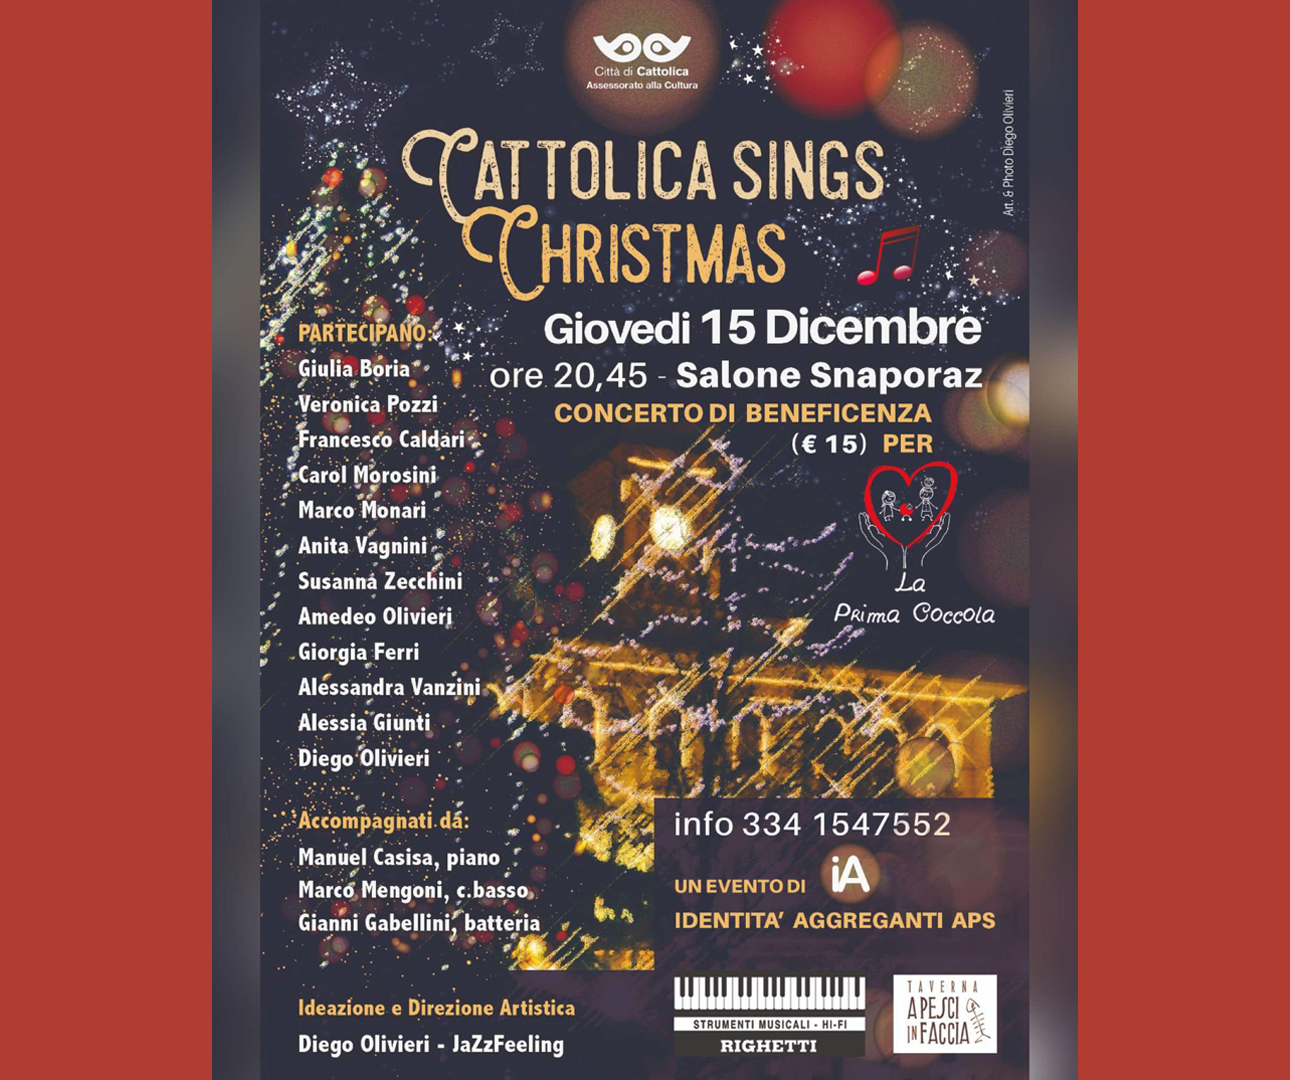 Cattolica Sings Christmas